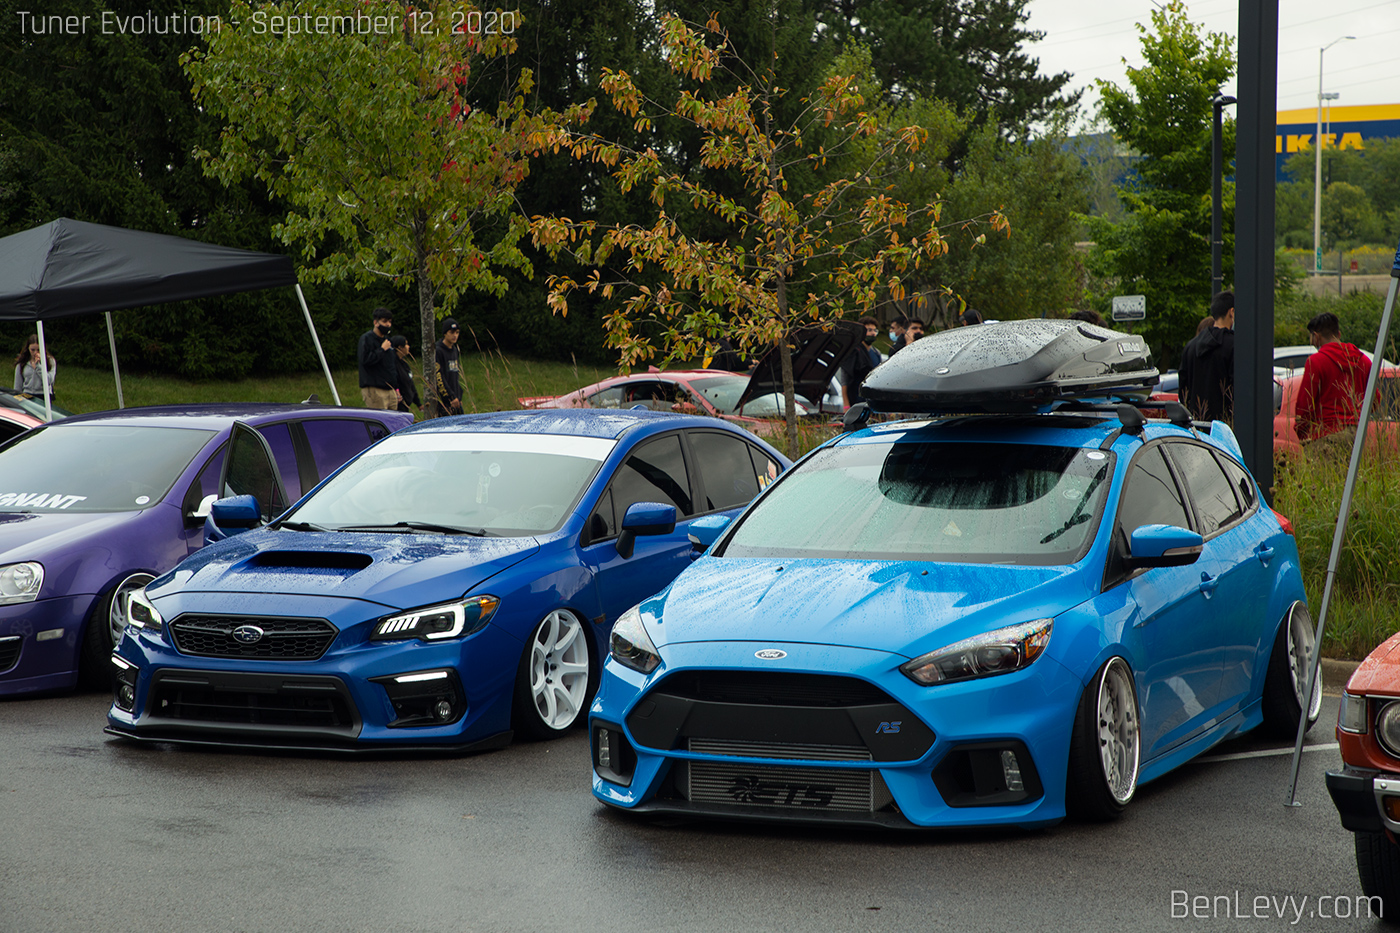 Blue Subaru WRX and Ford Focus RS